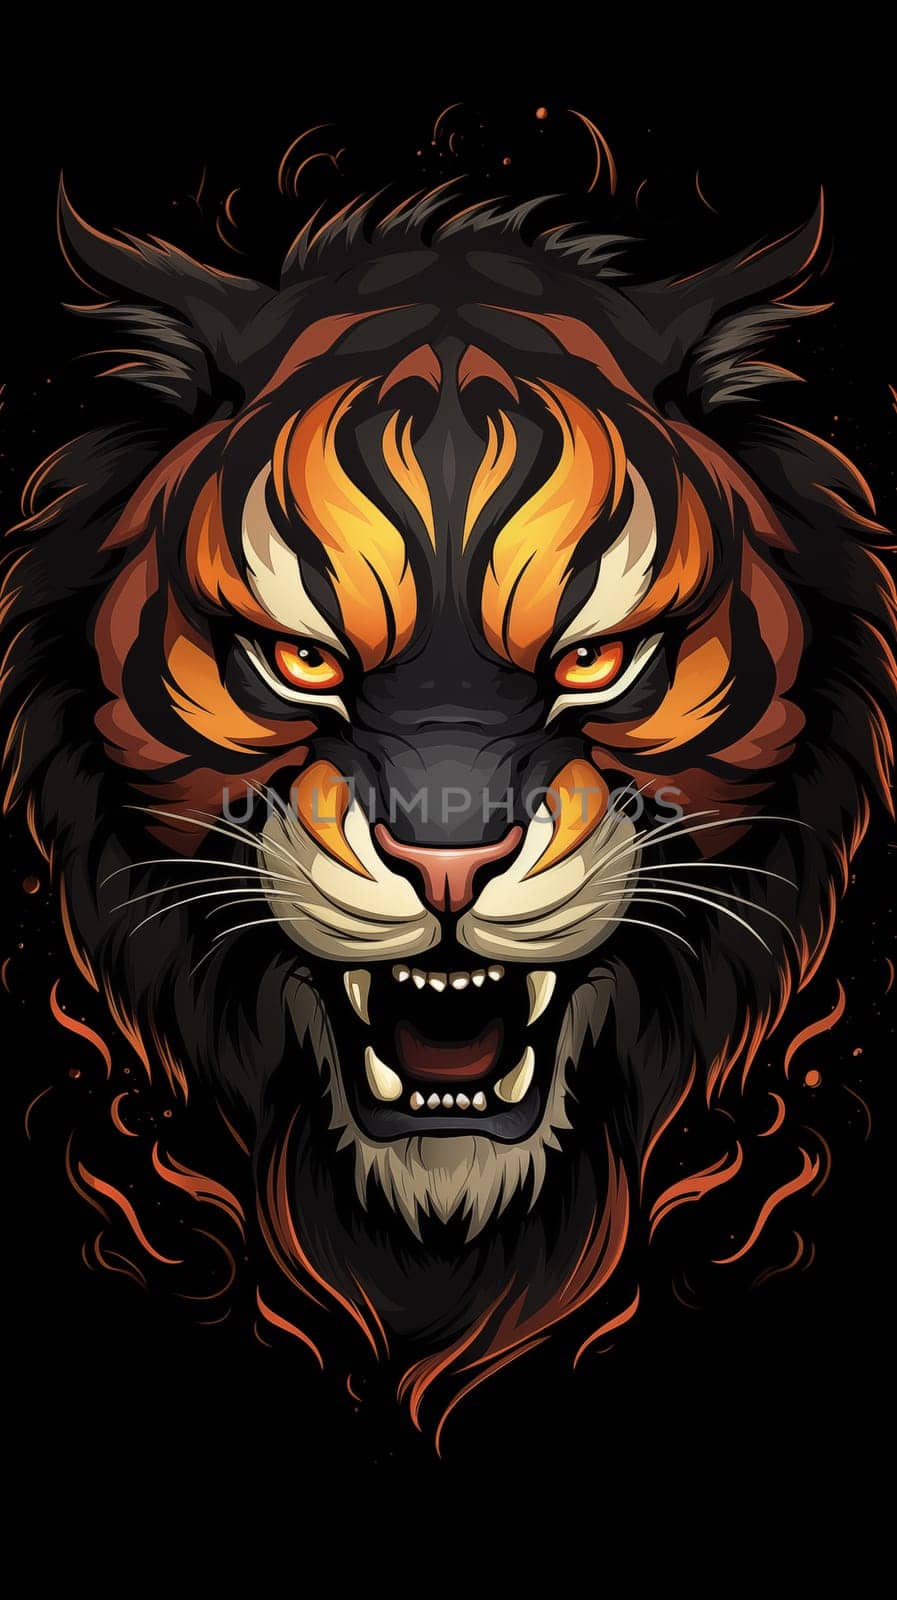 head of an angry tiger on a black background, cartoon style by Zakharova